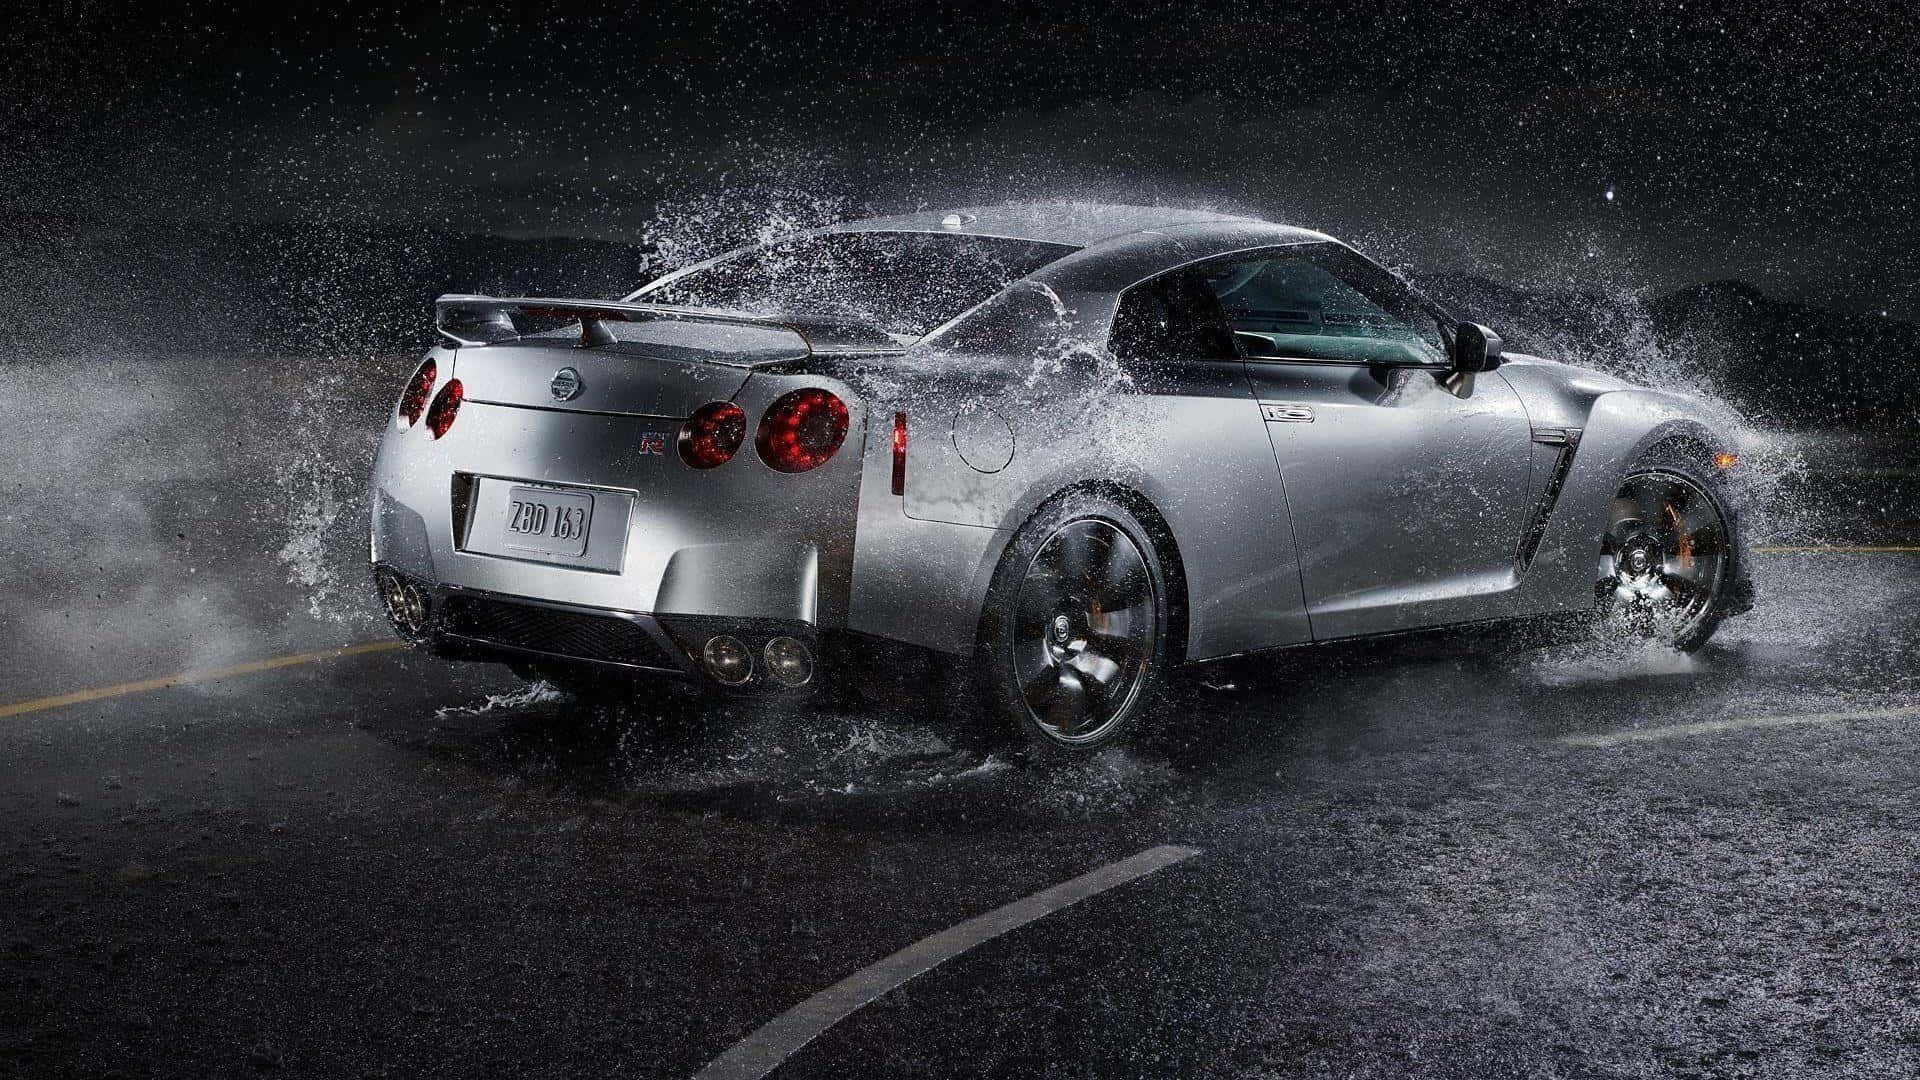 A Silver Sports Car Splashing Water On The Road Wallpaper